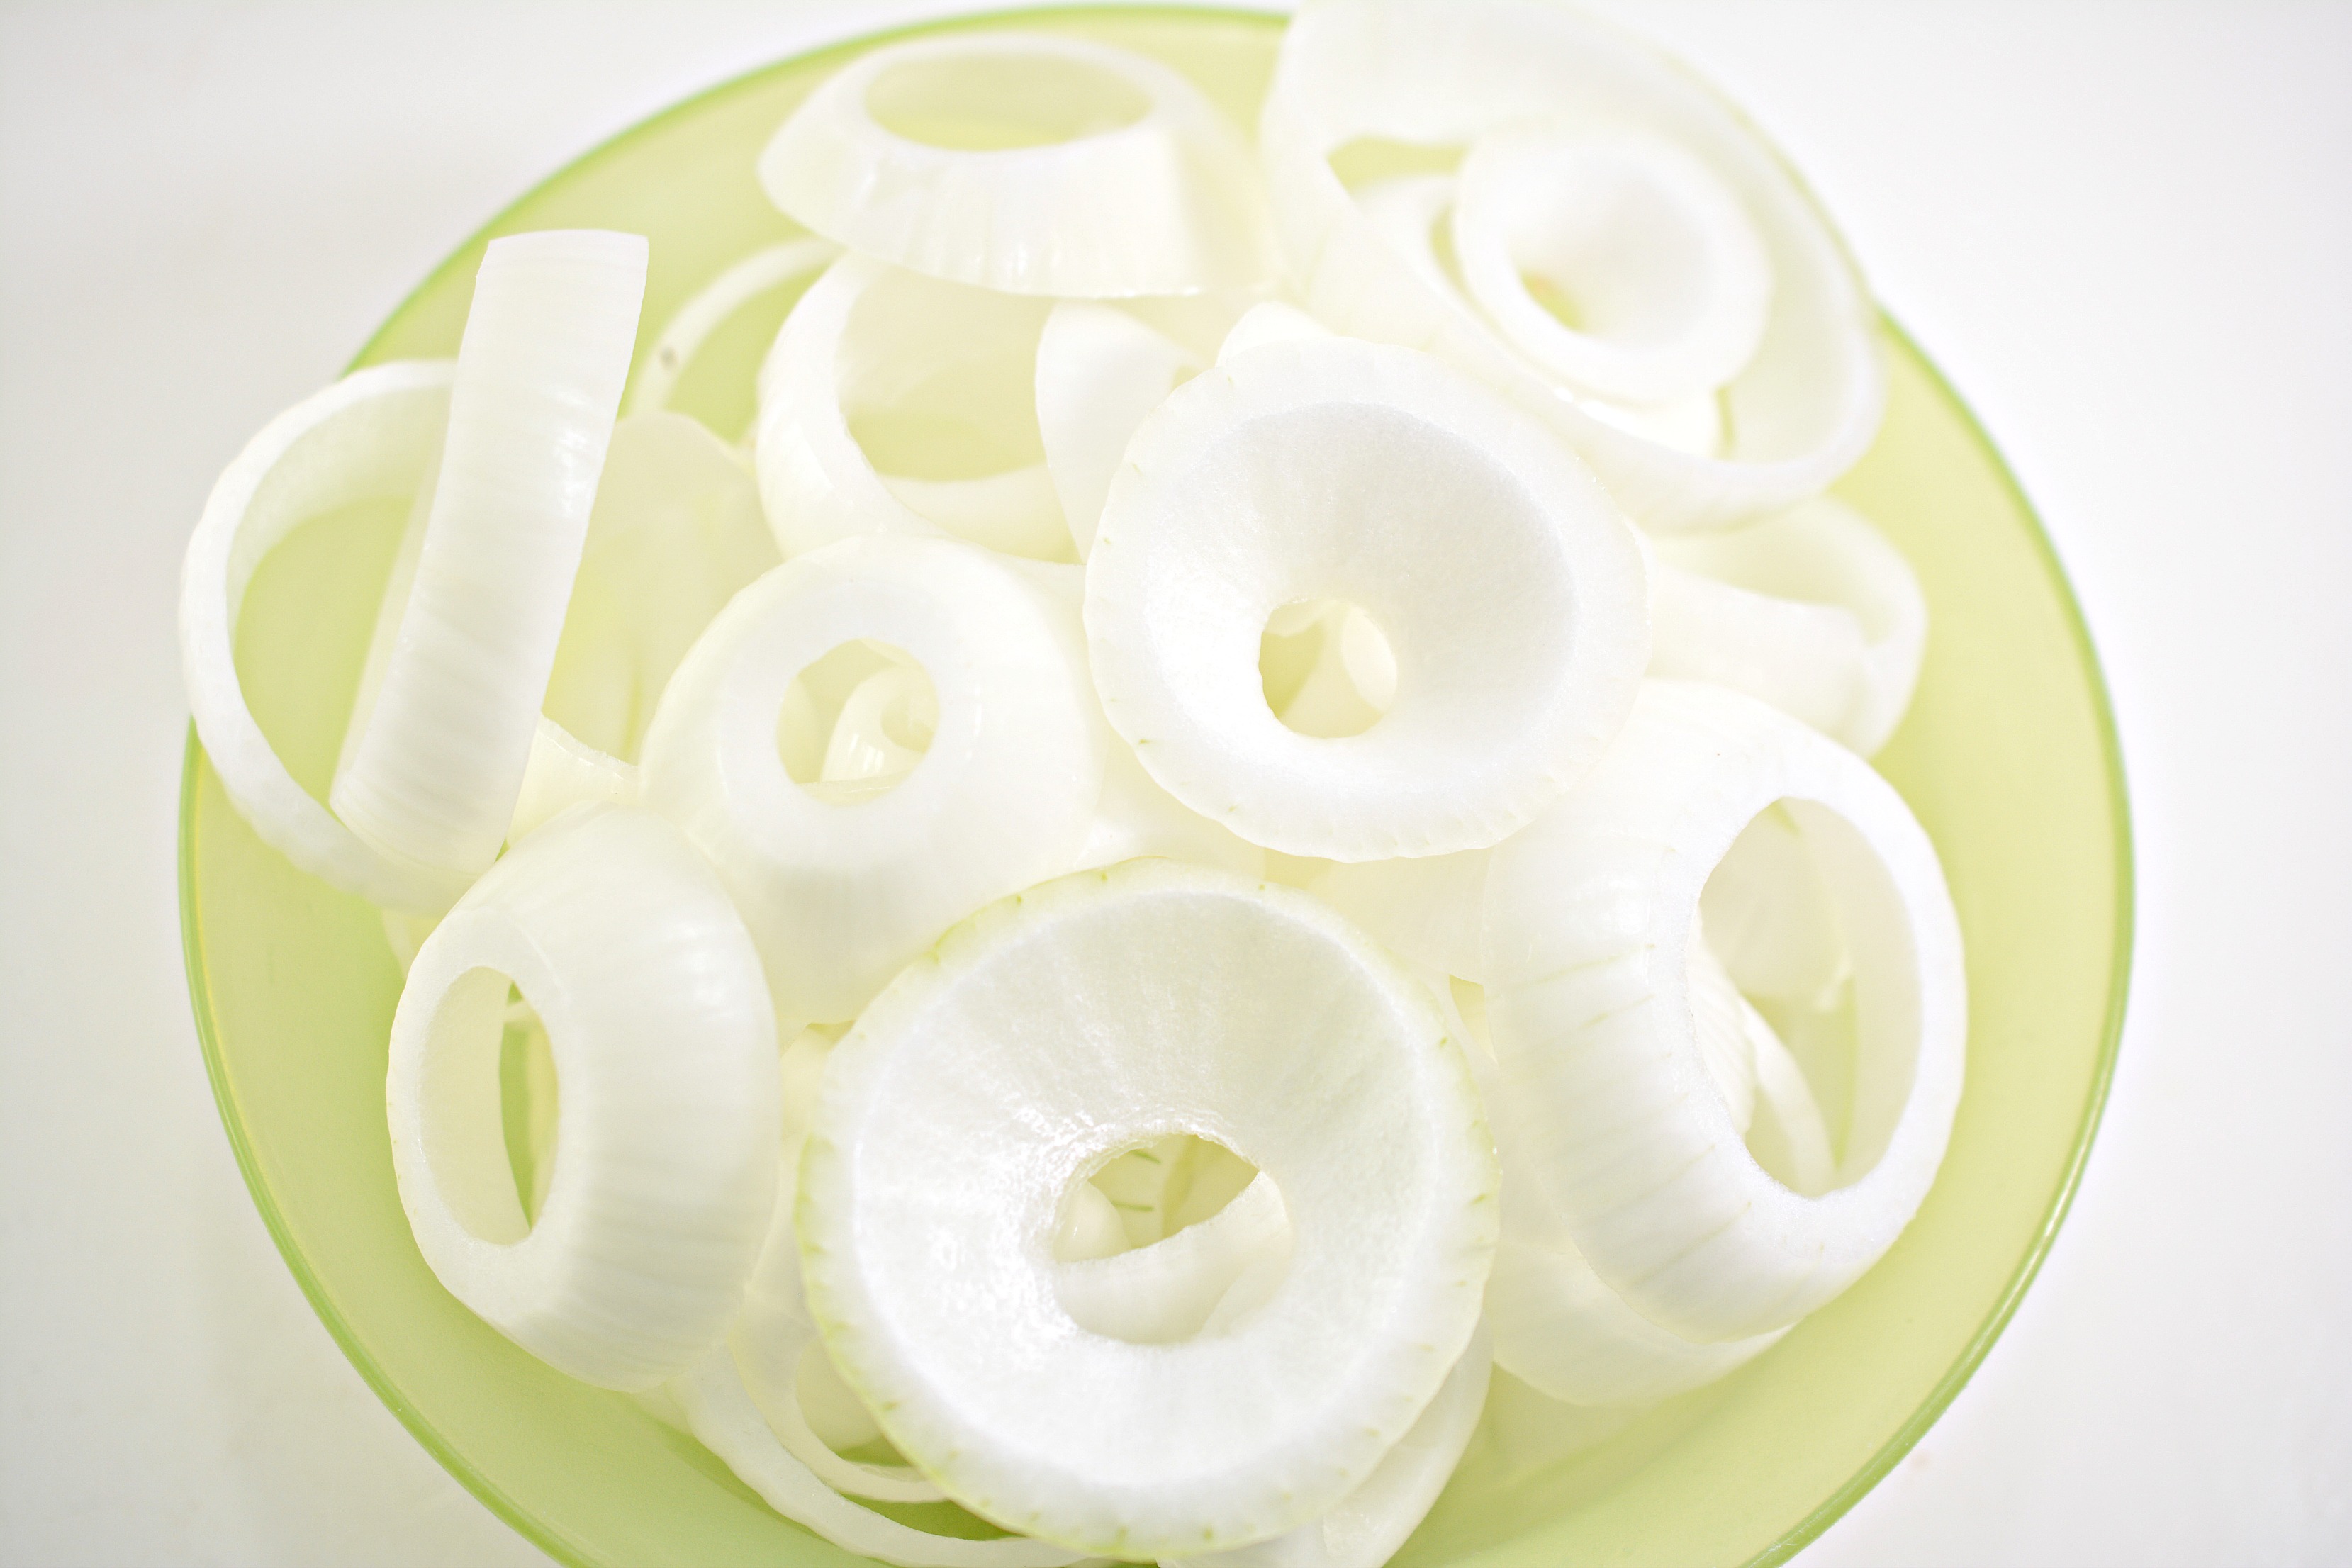 onions in a bowl